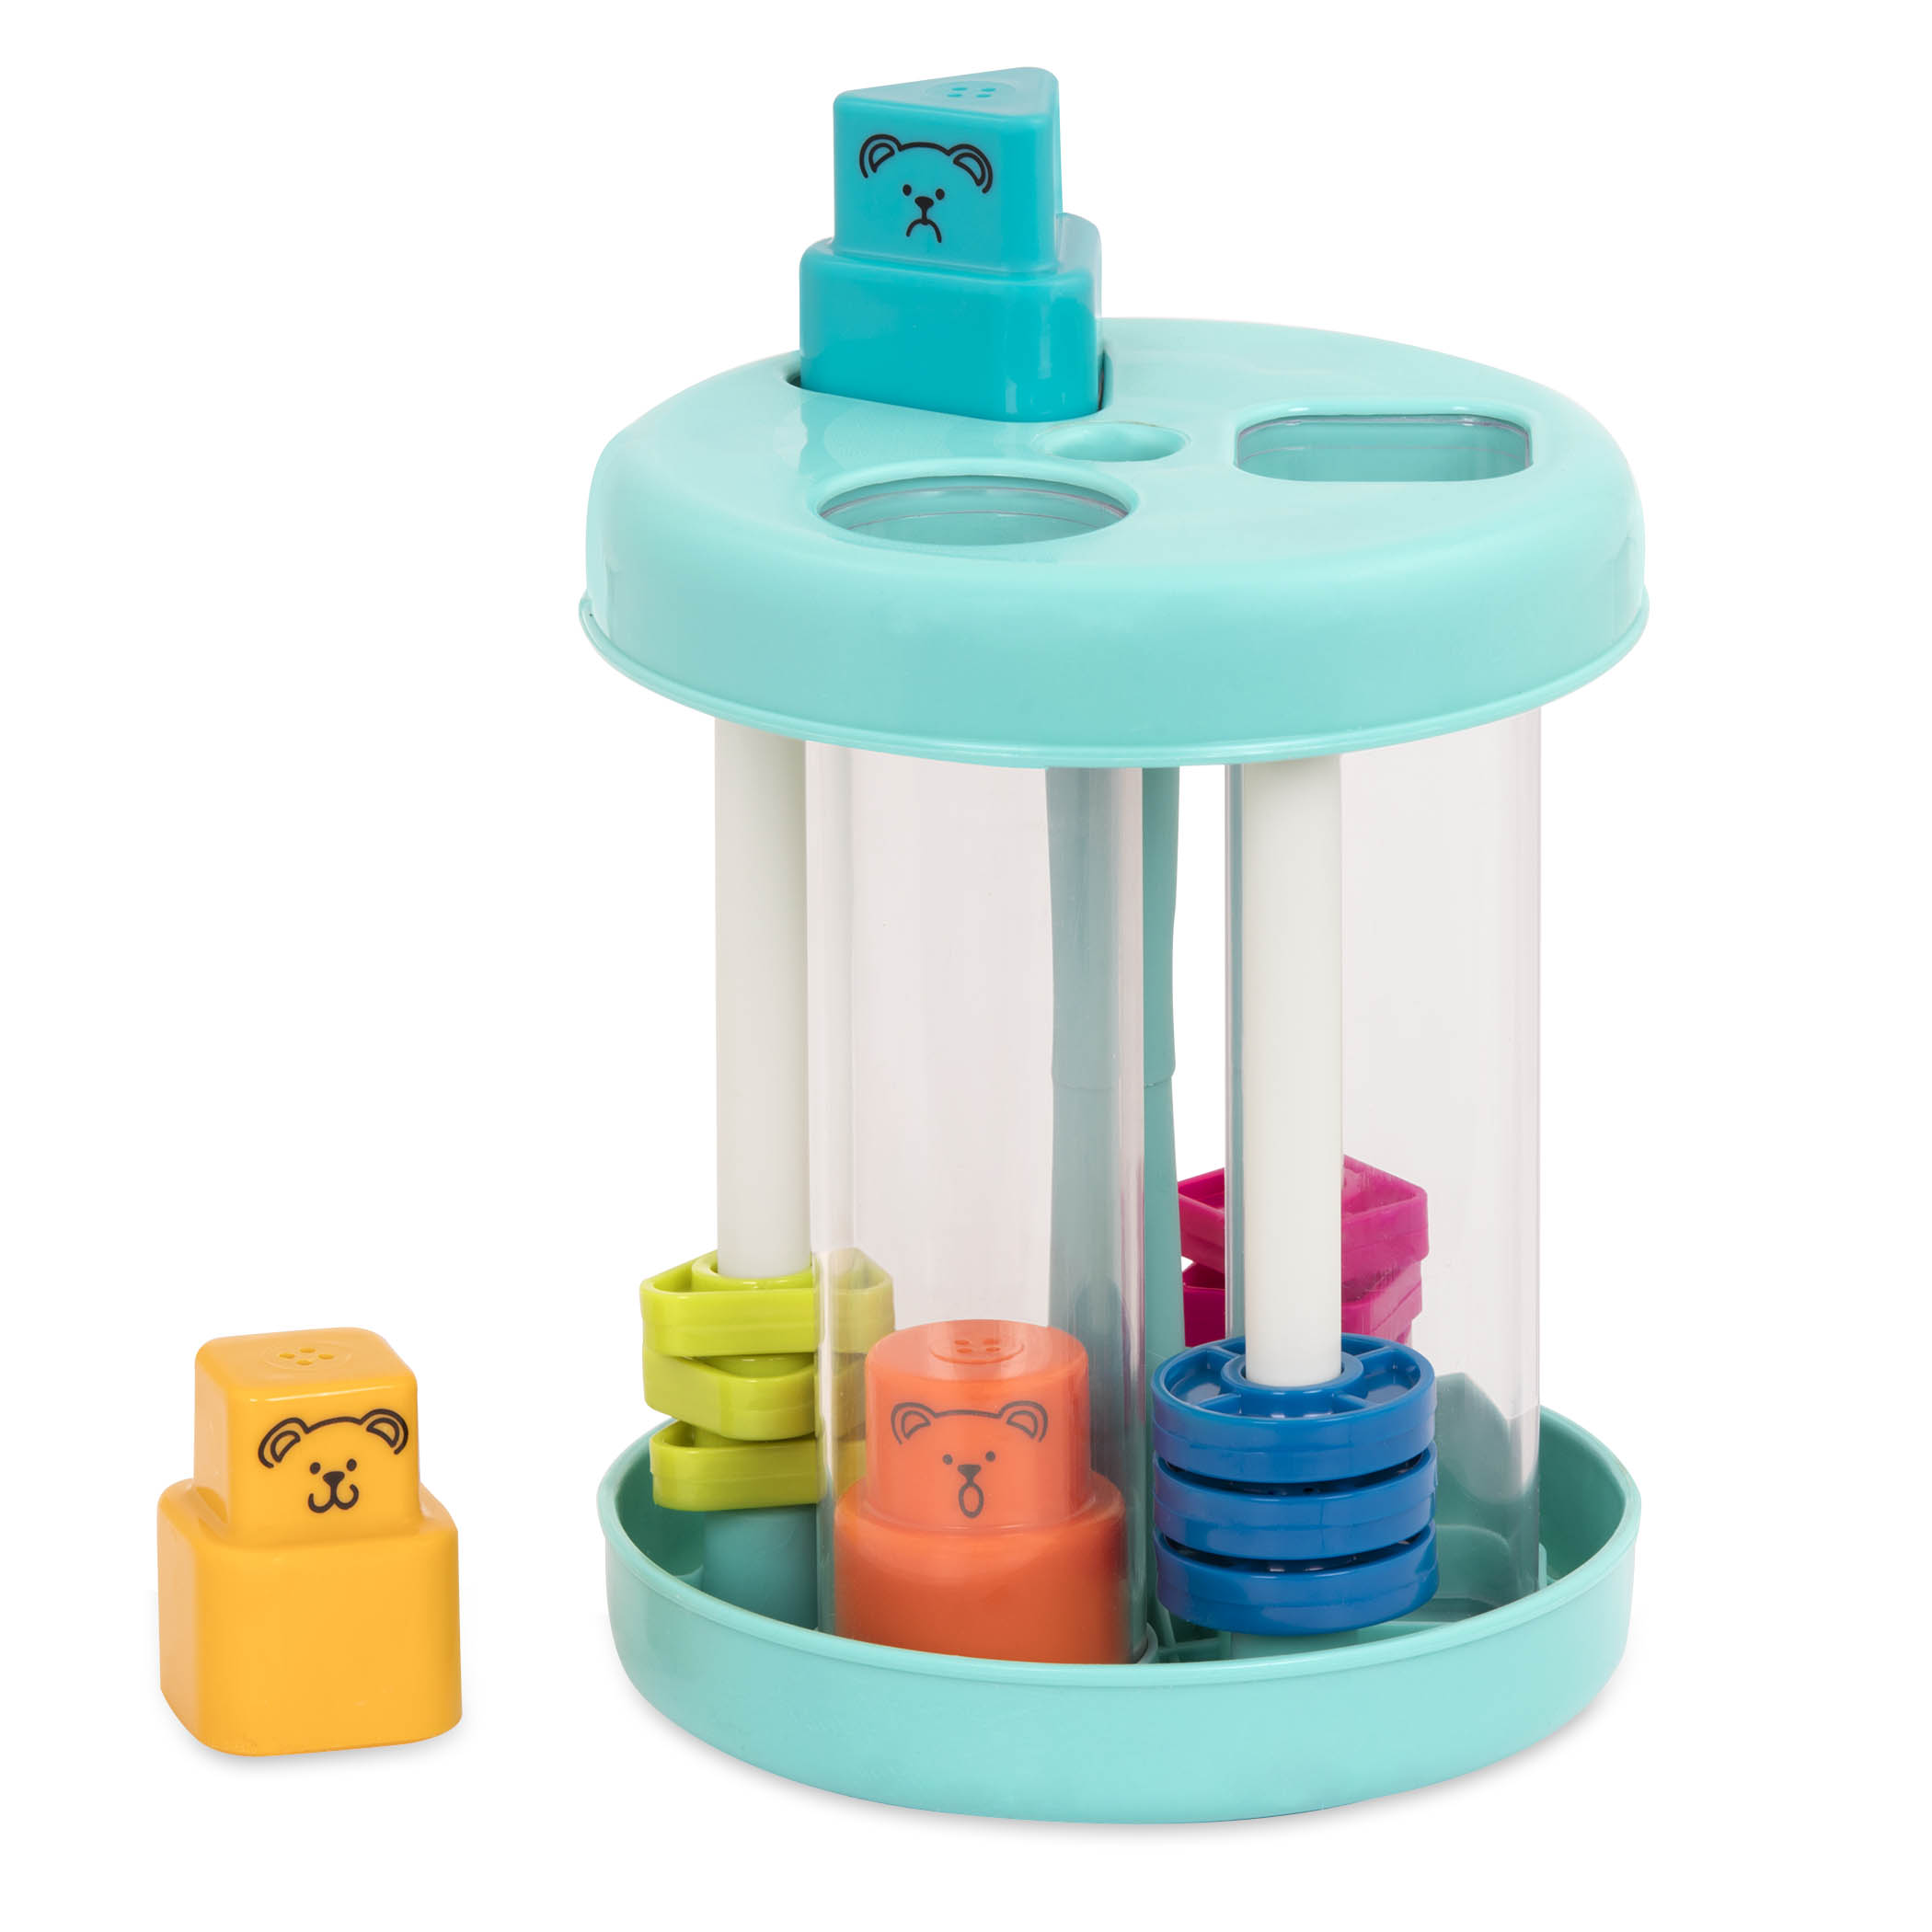 Shapes & Sounds Sorter, Sorting Toy